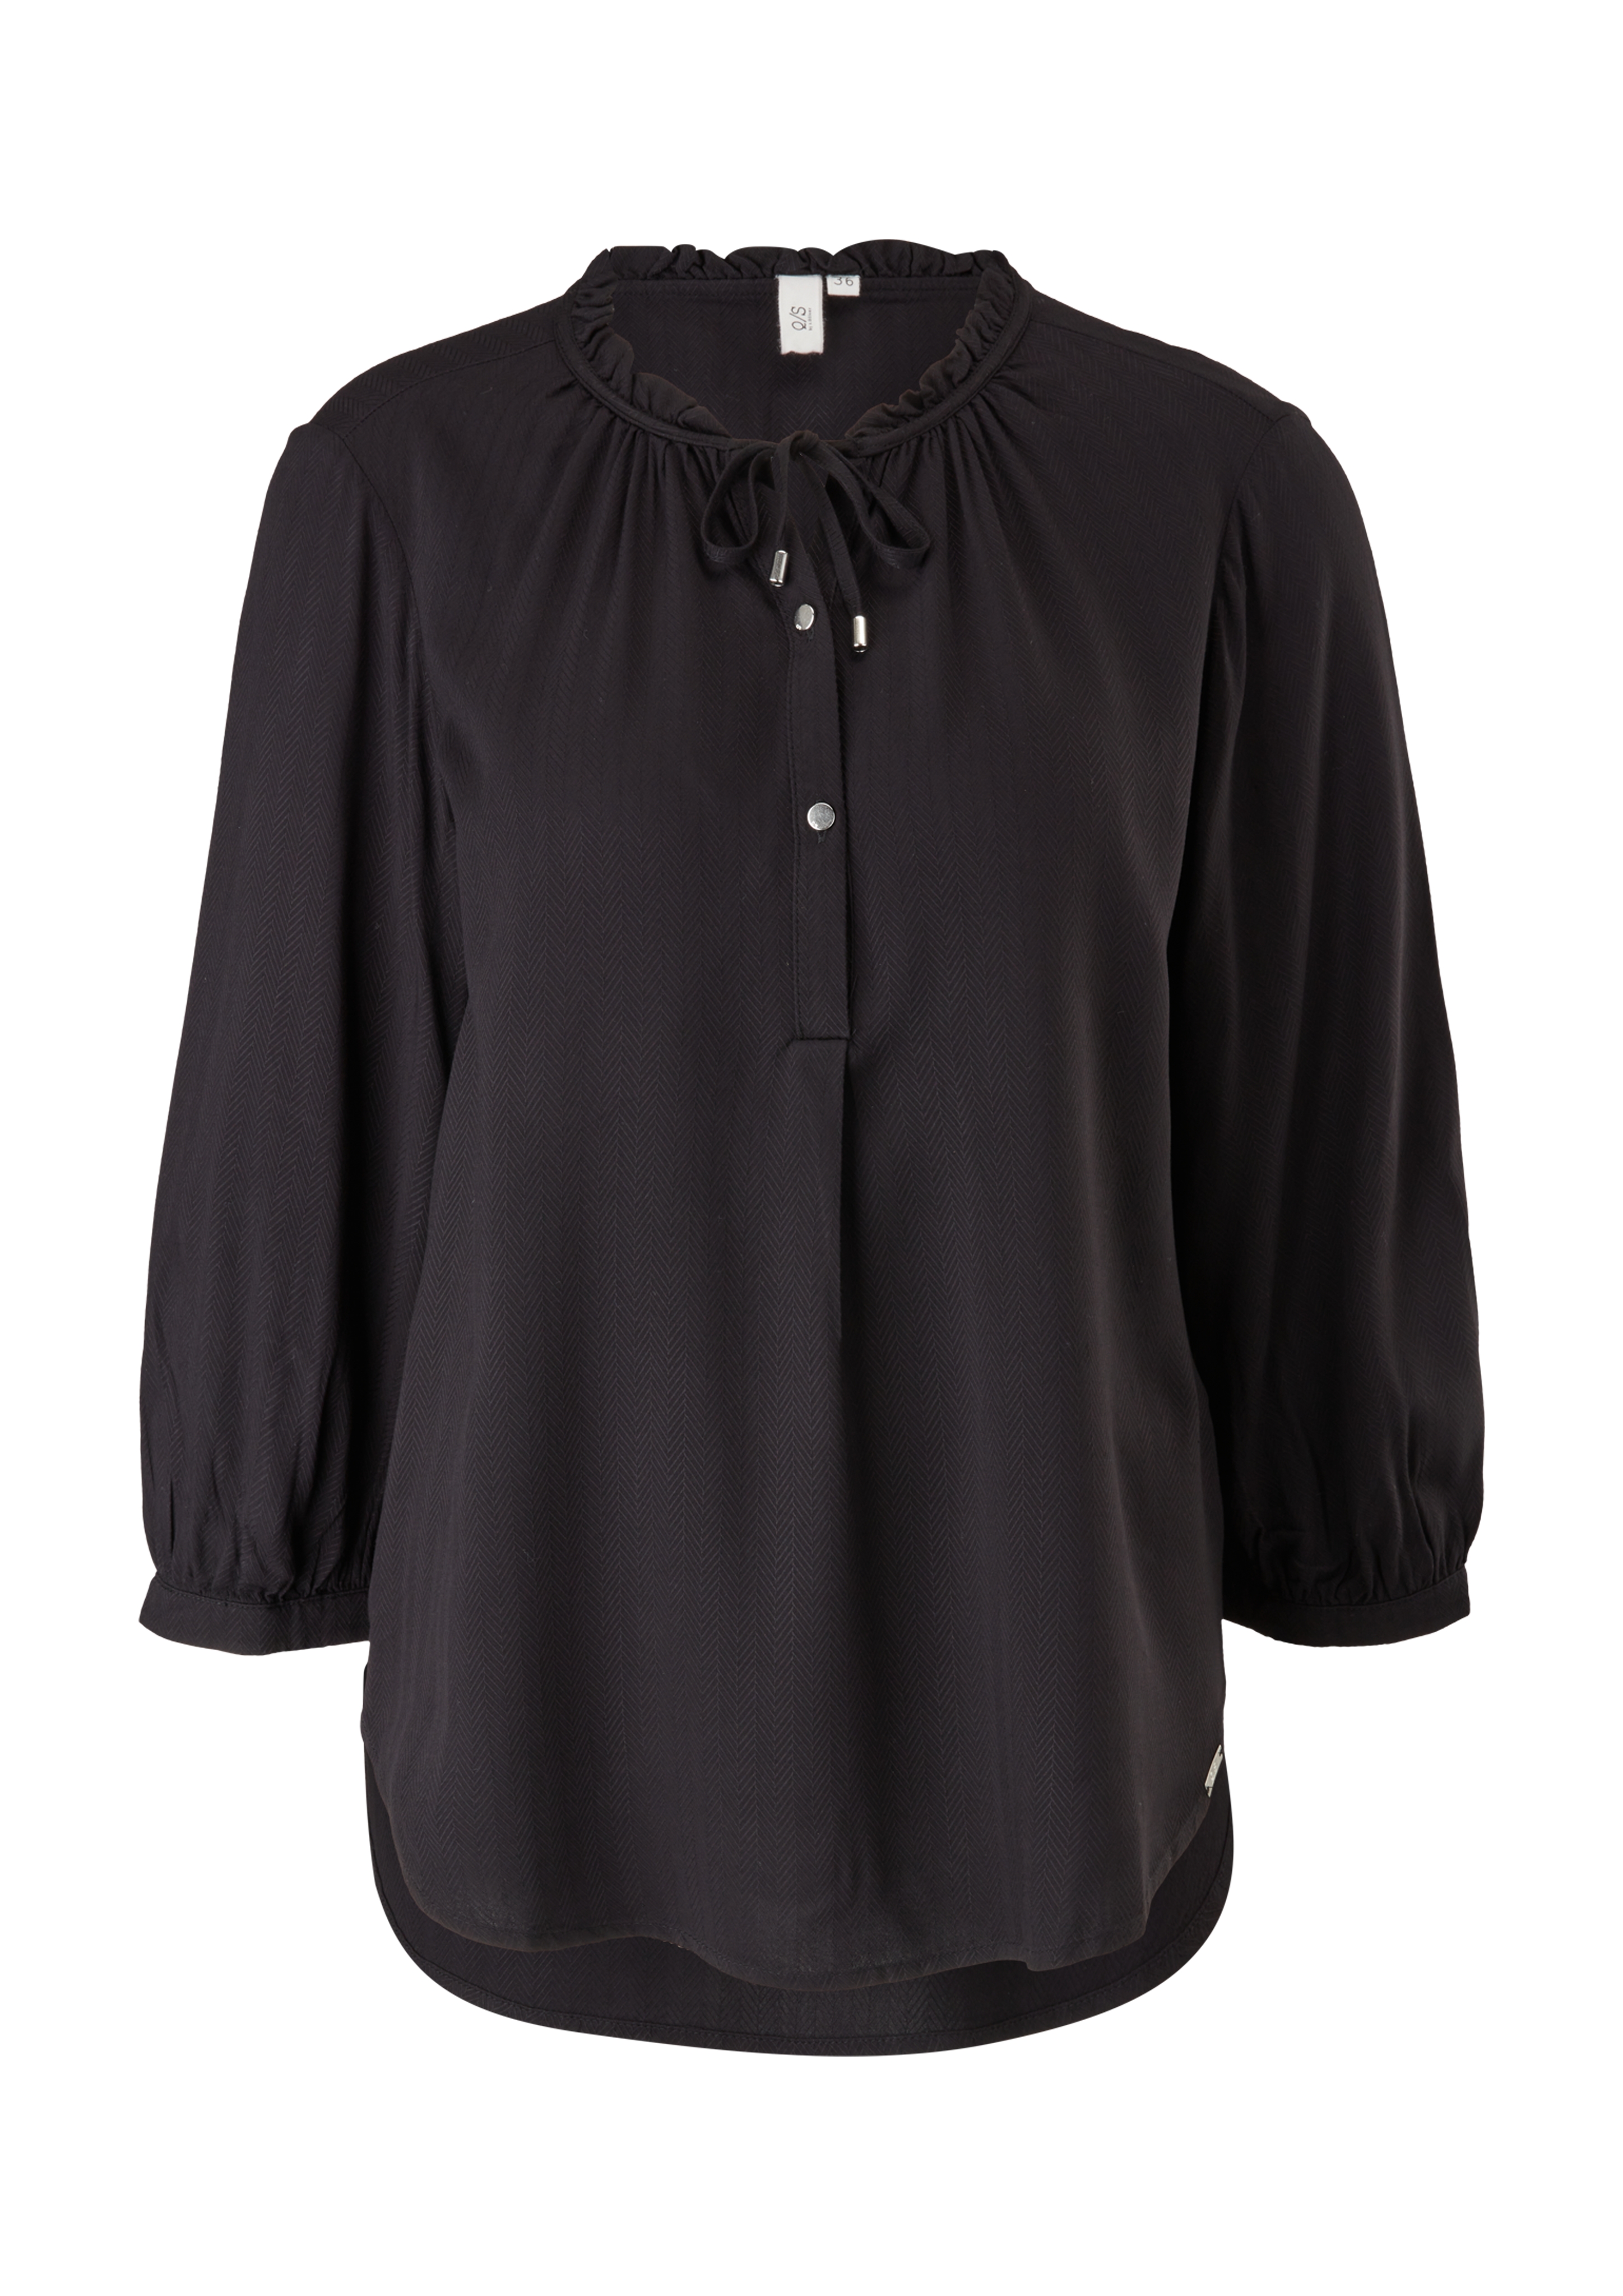 Q/S by s.Oliver Bluse in Schwarz 